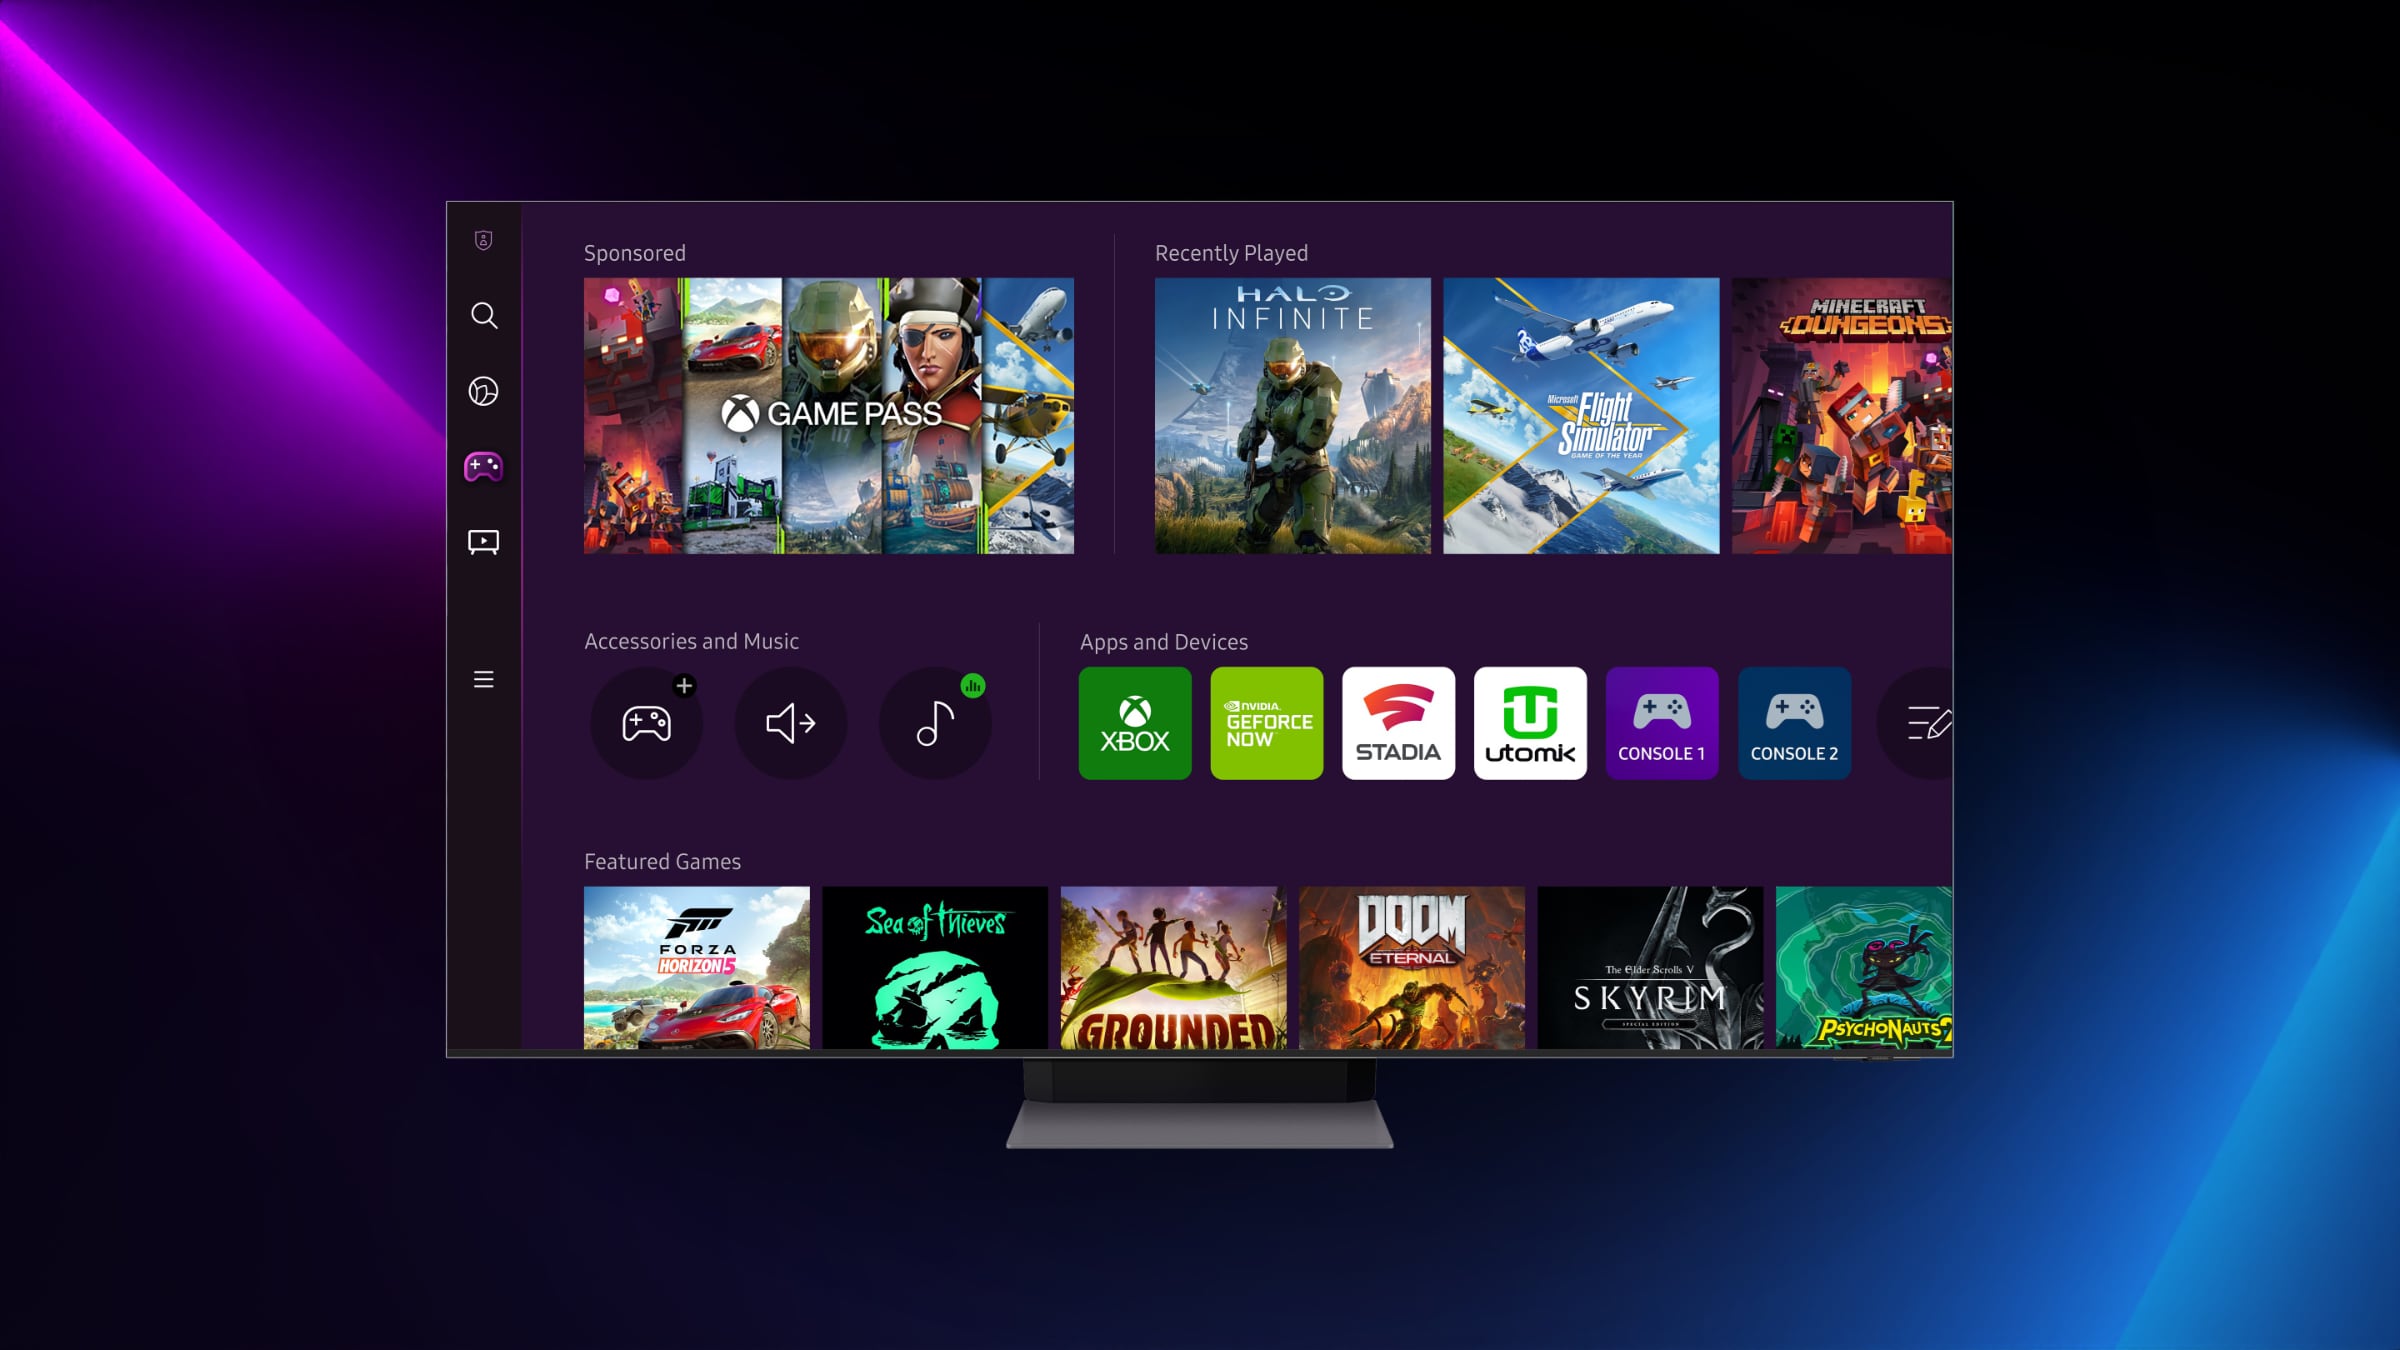 How to Play Xbox Games on a Samsung TV without an Xbox 